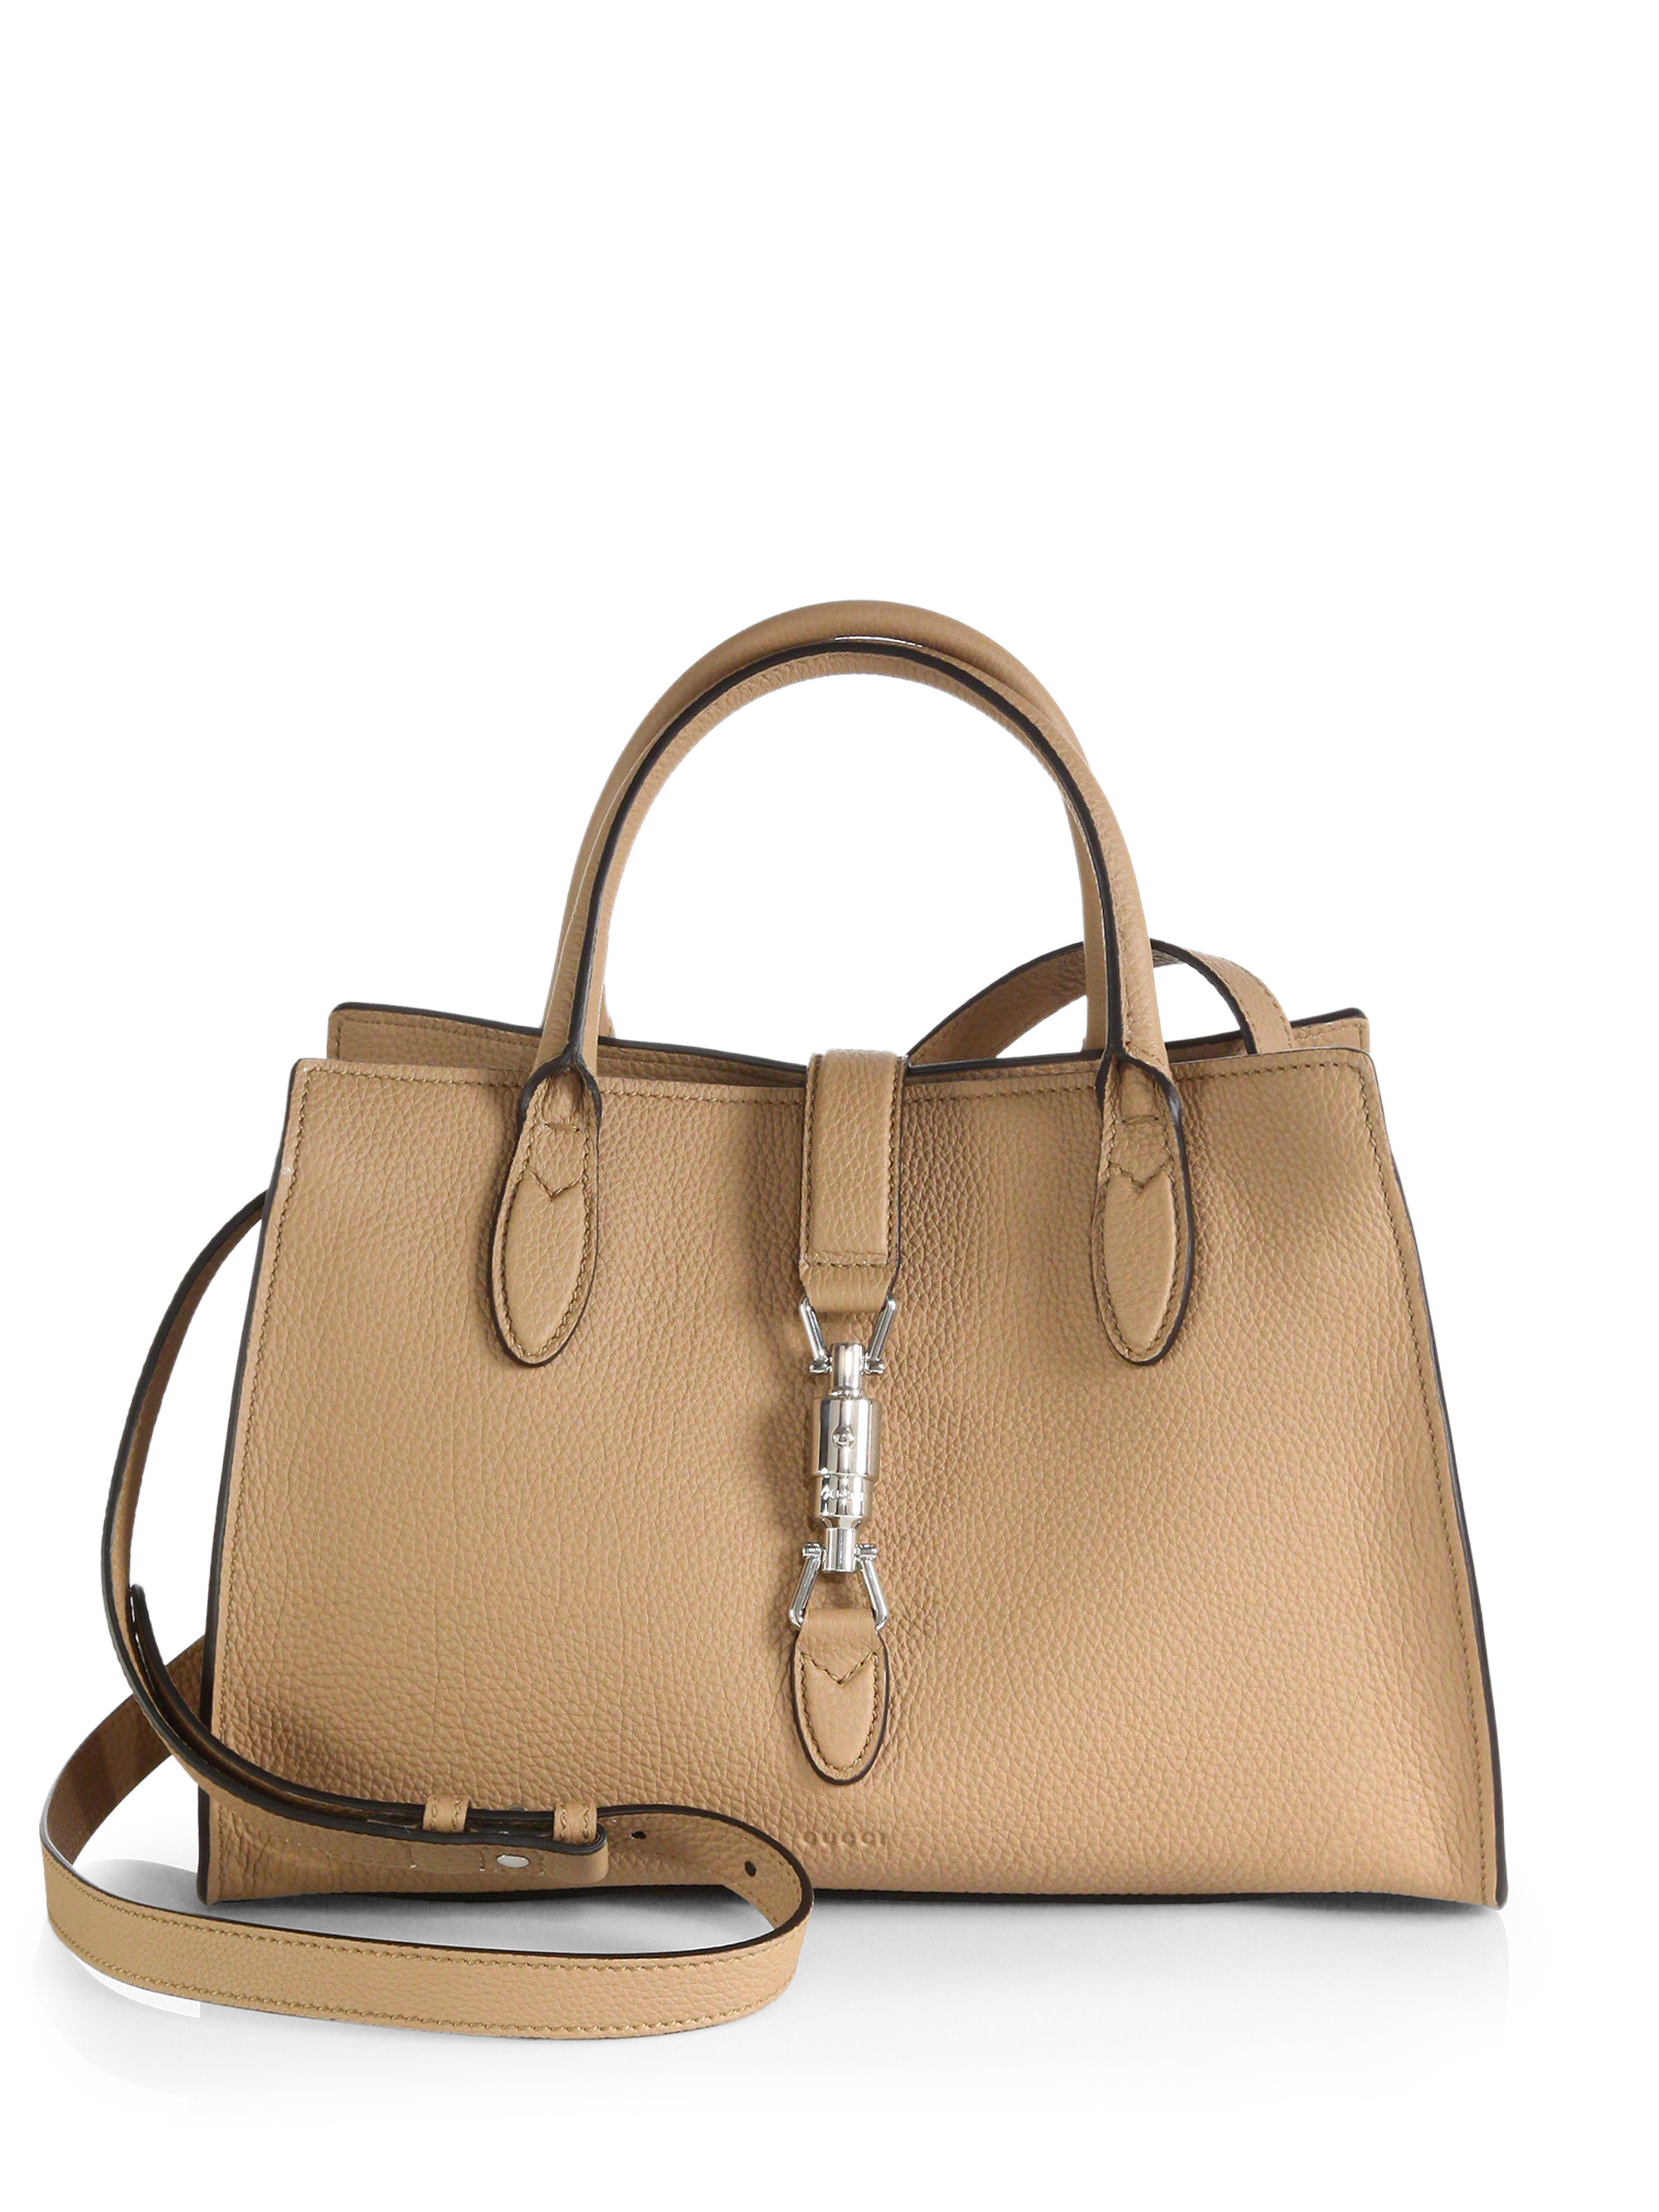 Gucci Jackie Soft Leather Top Handle Bag in Natural | Lyst